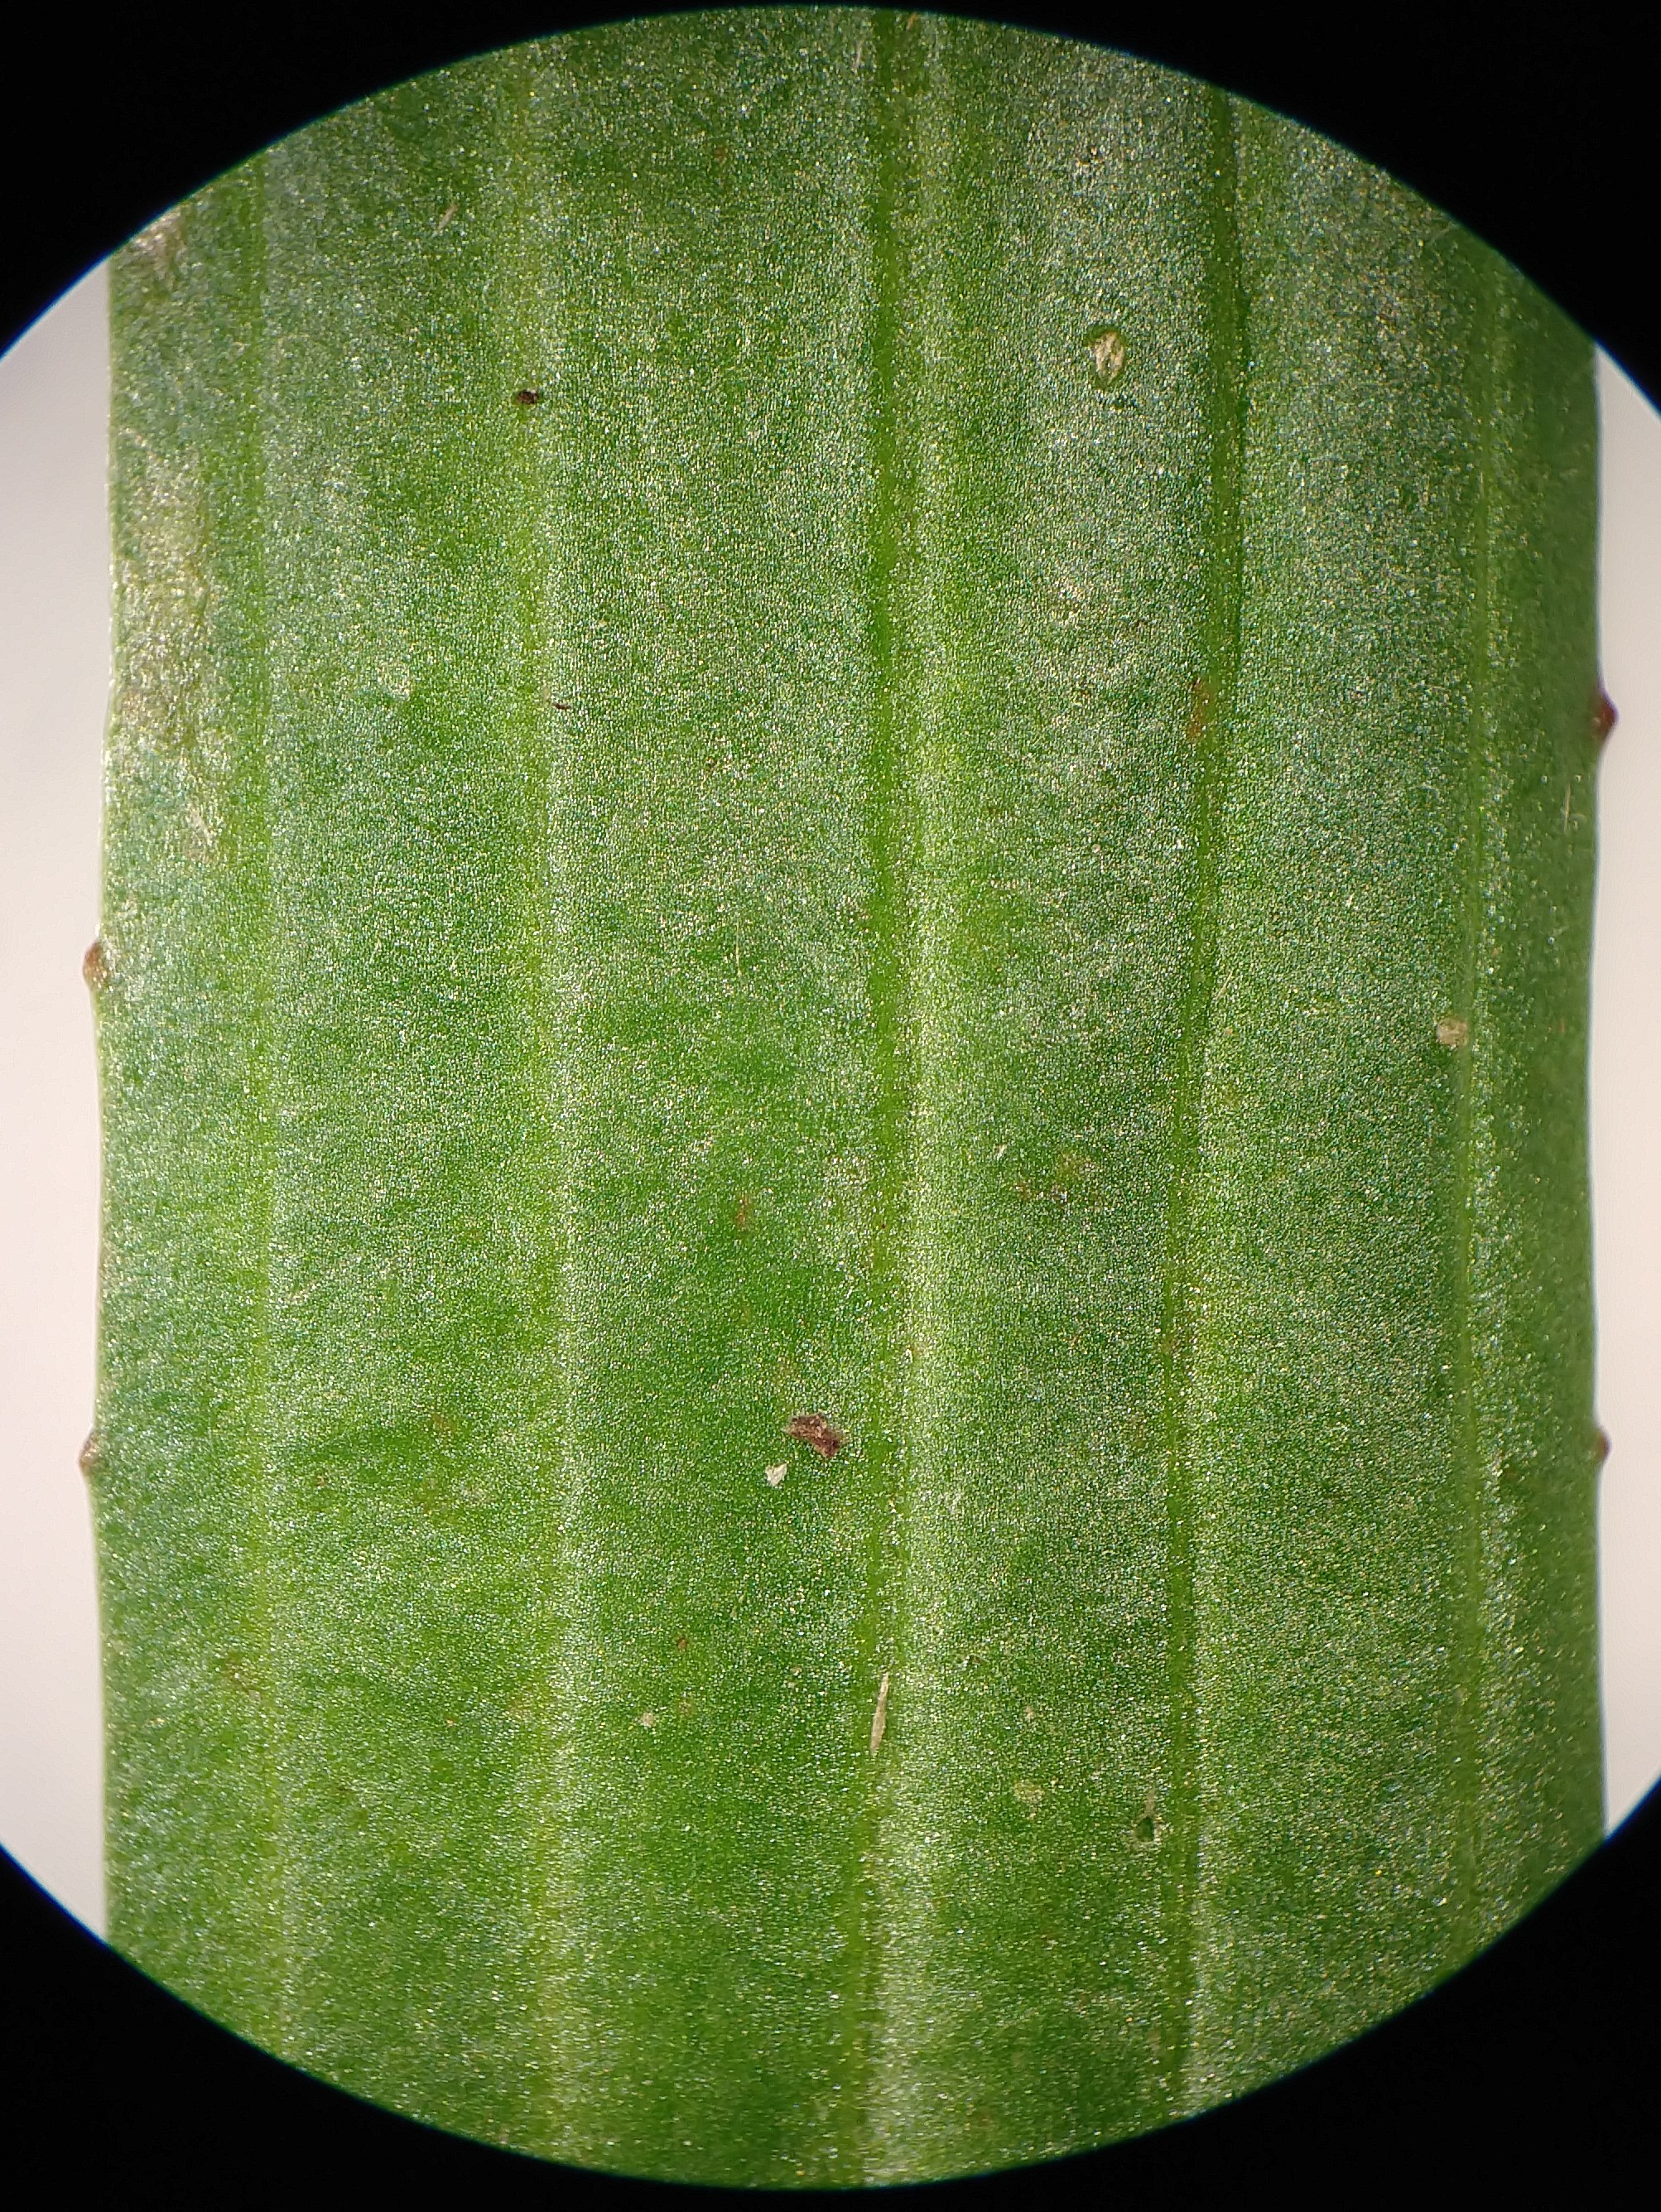 A Plantago leaf with parallel venation (the veins do not intersect or branch)